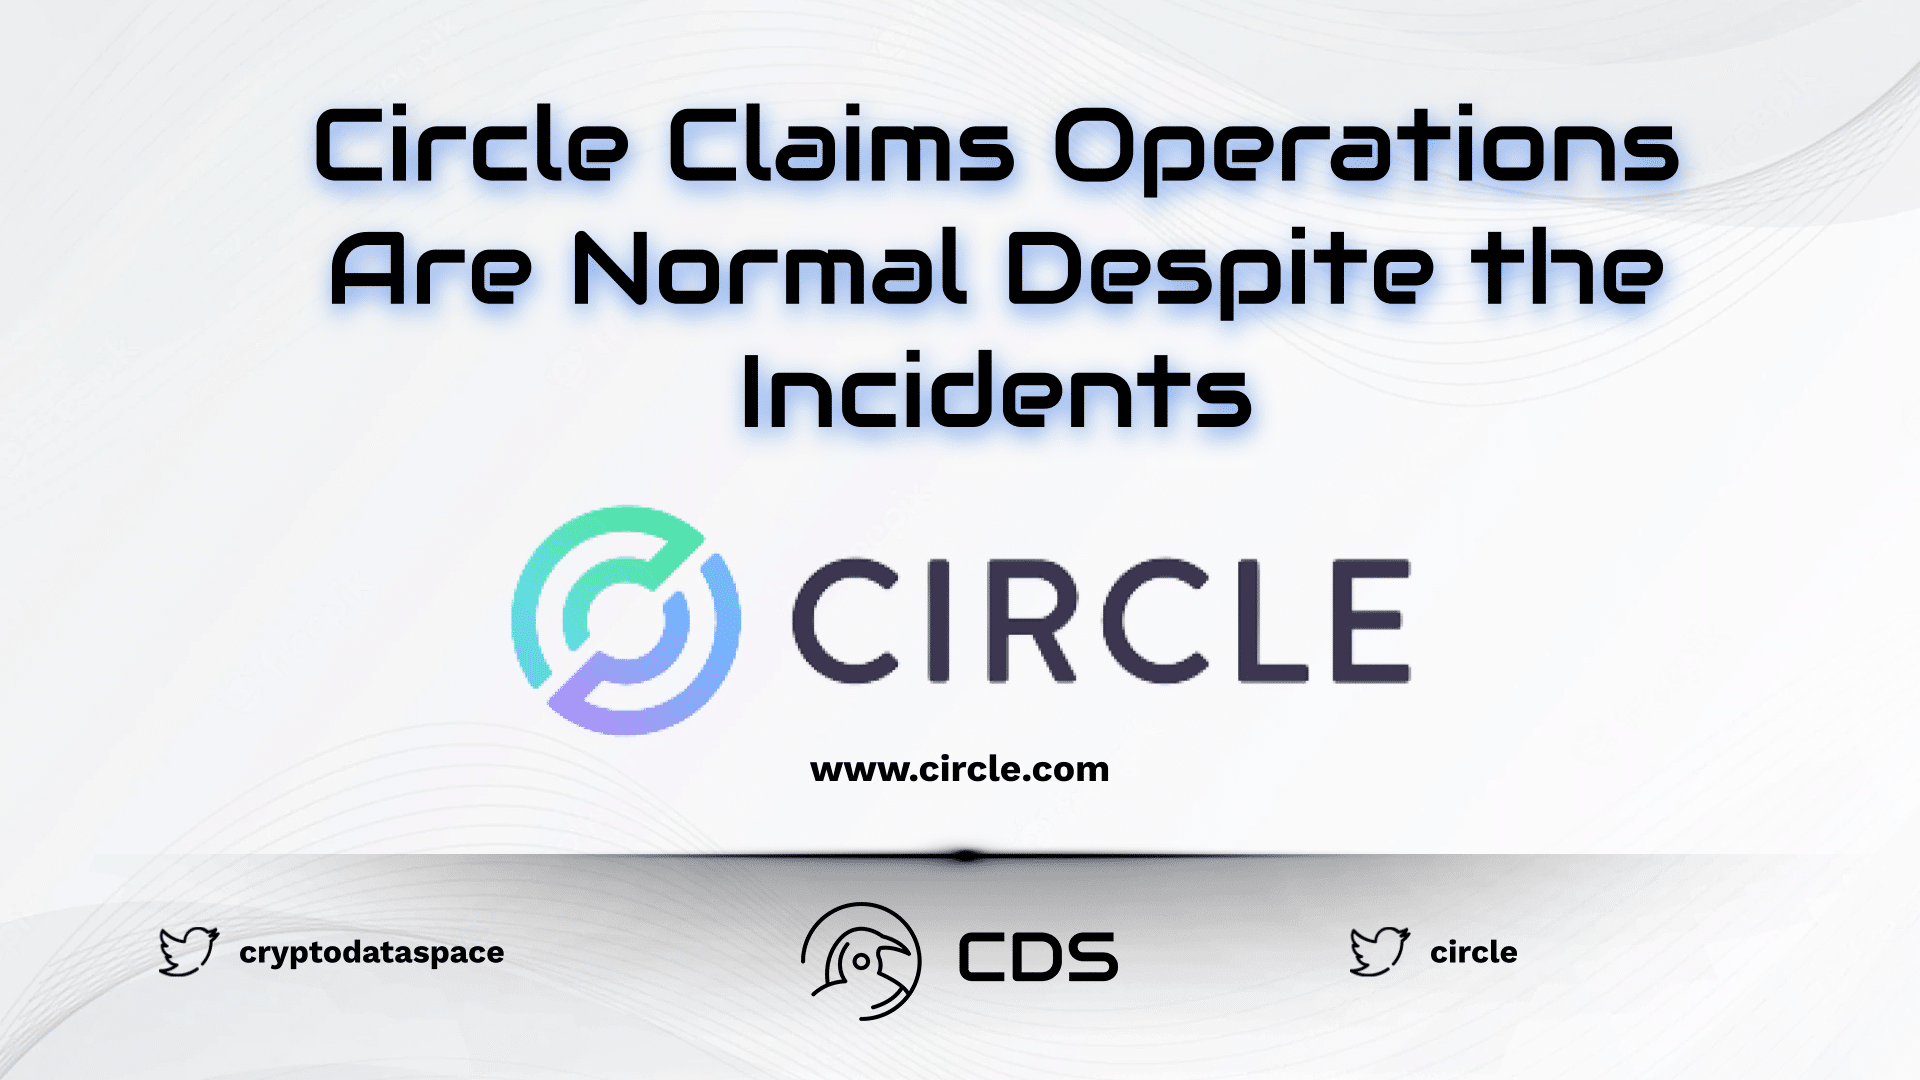 Circle Claims Operations Are Normal Despite the Incidents